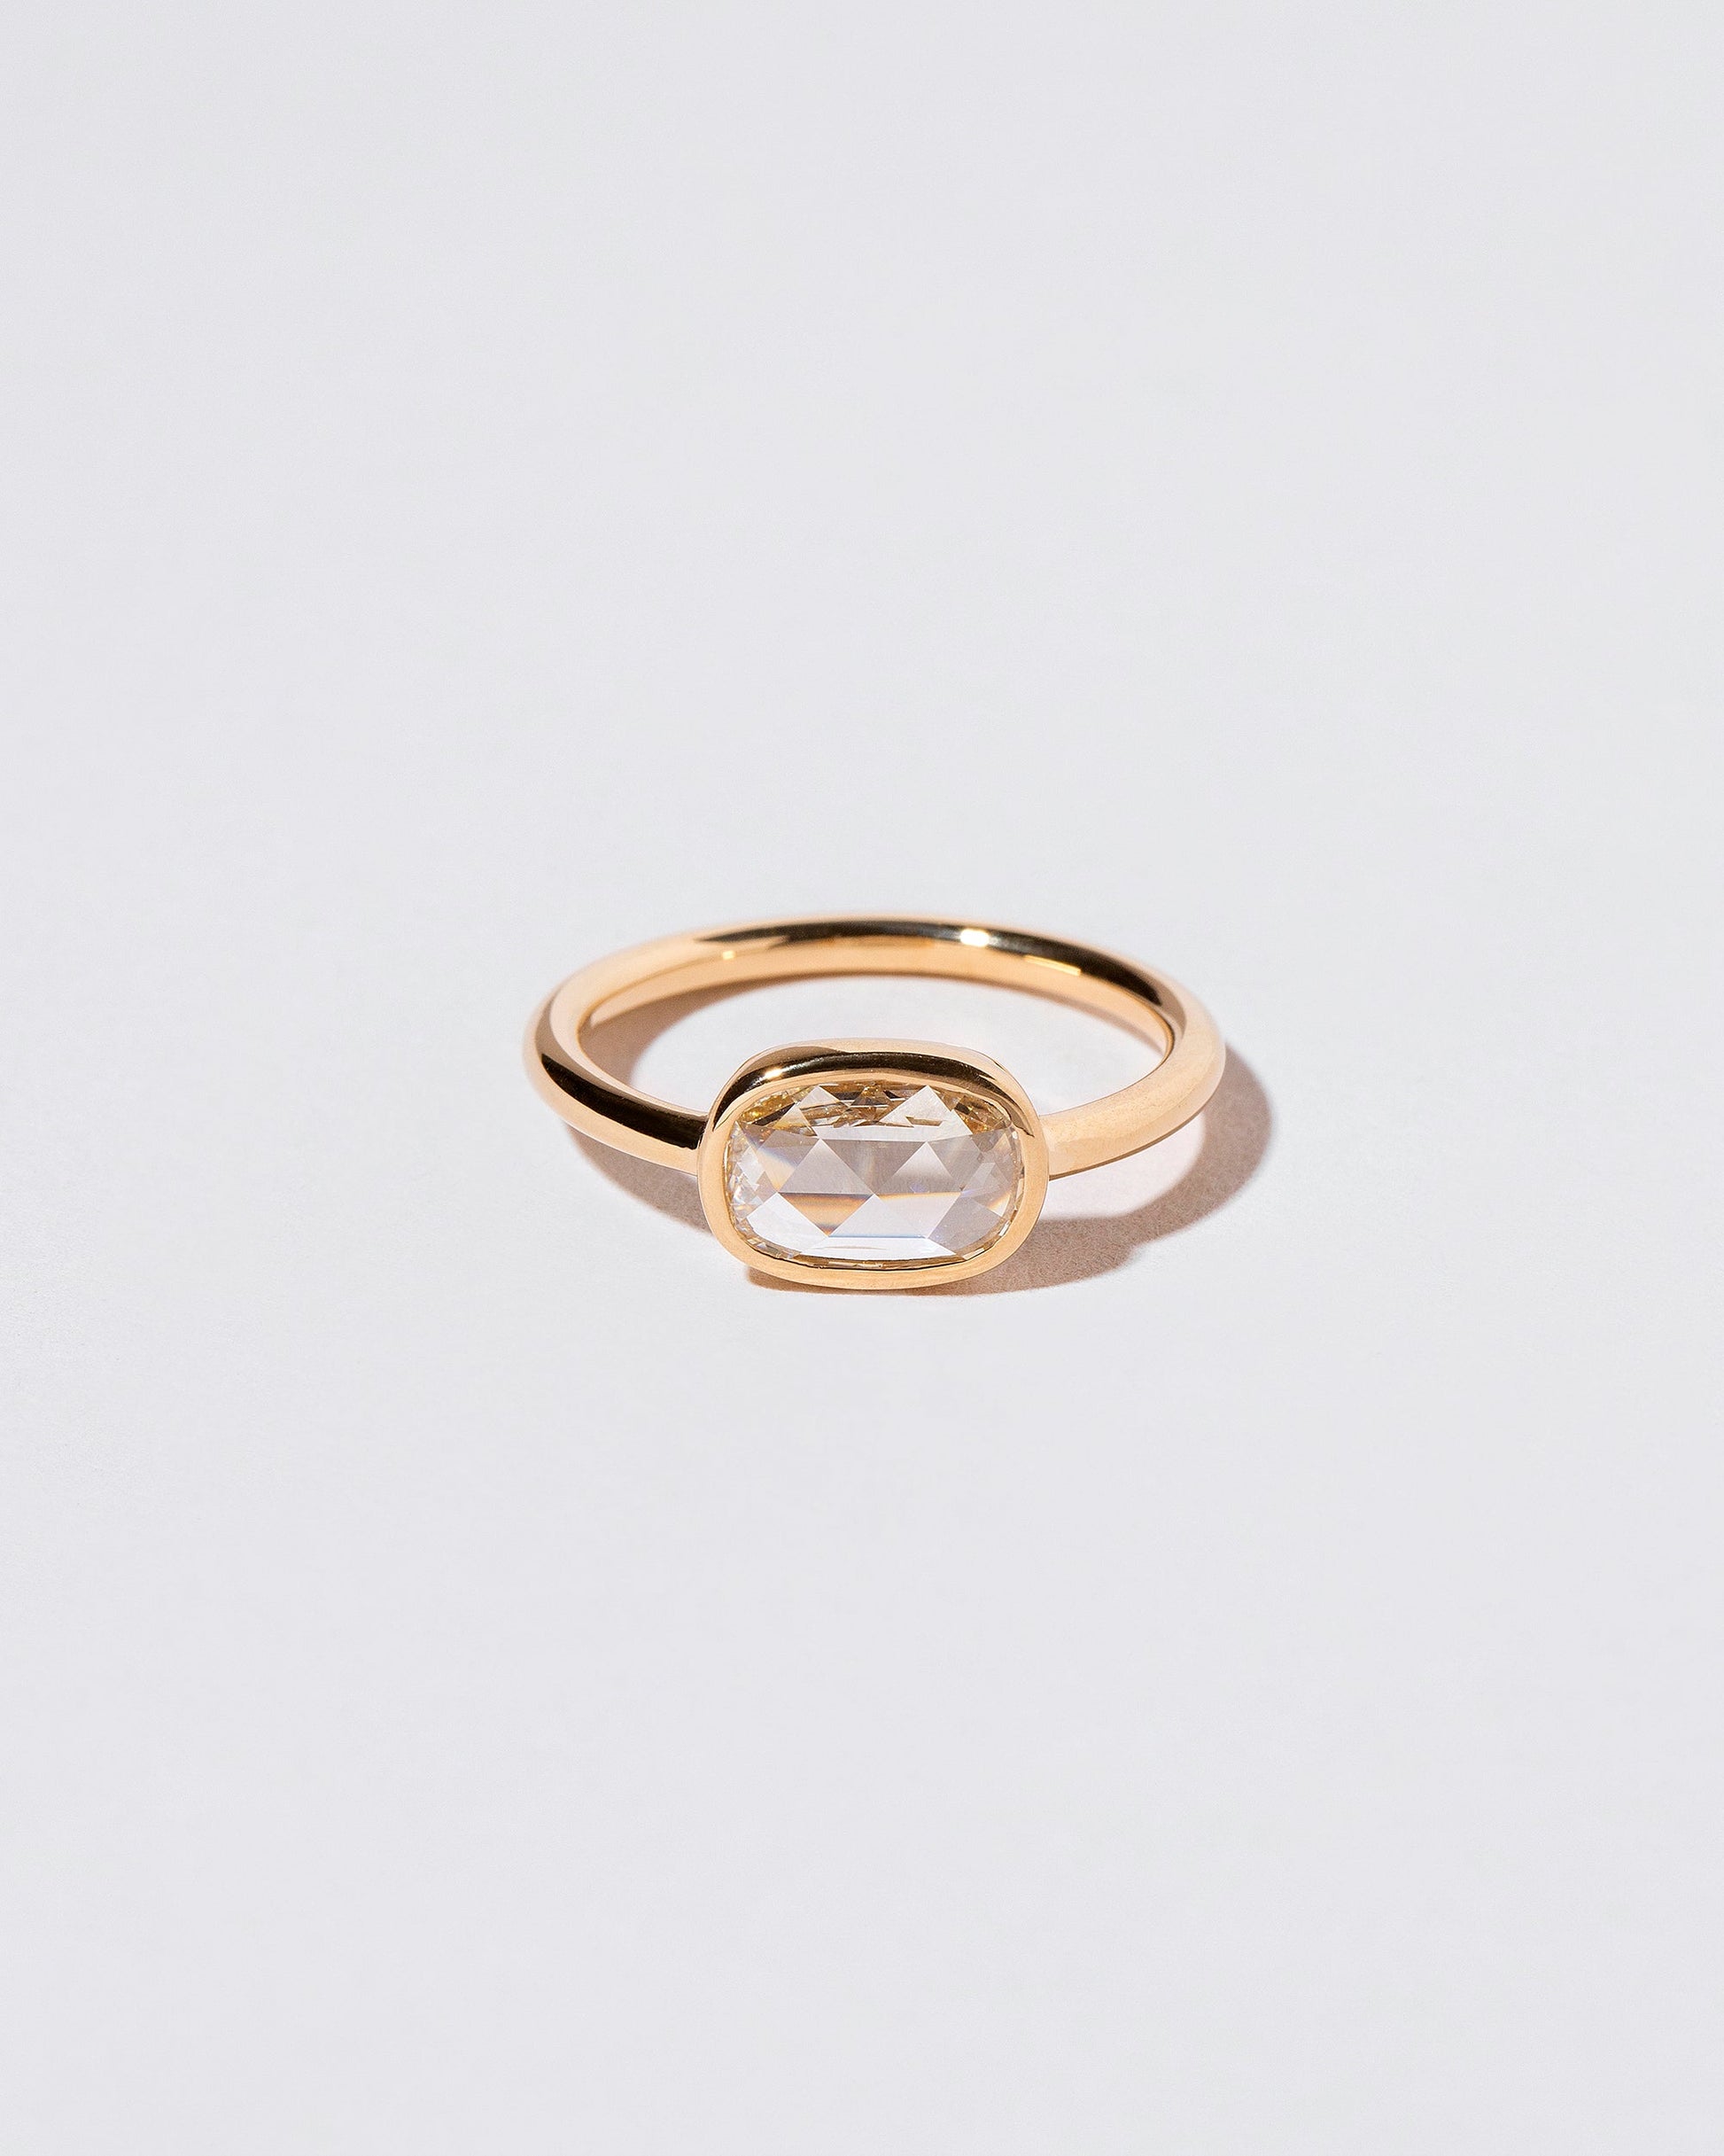  Apollo Ring on light color background.